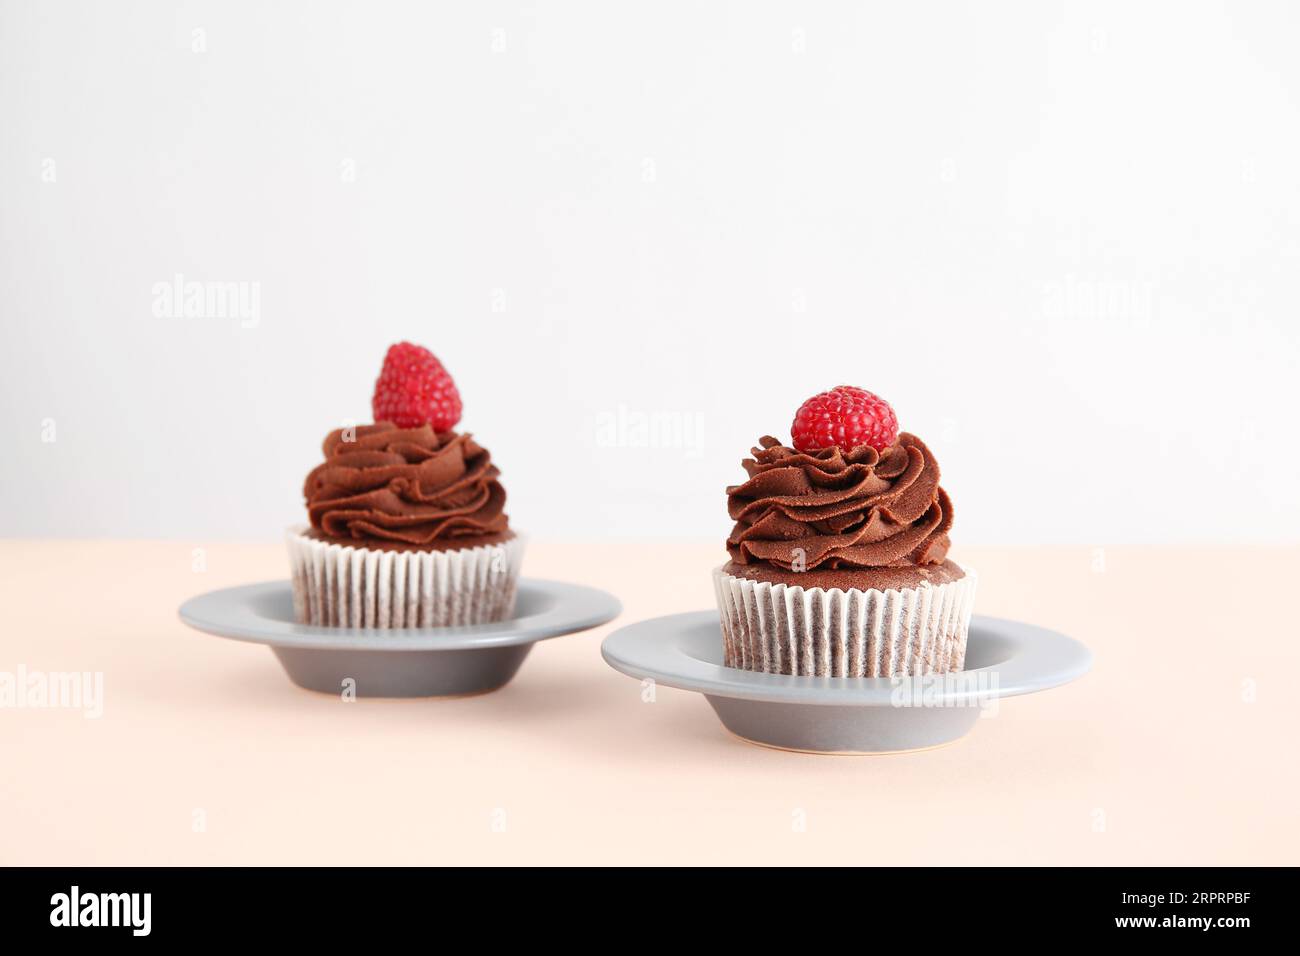 Chocolate muffins with decoration on the plate Stock Photo - Alamy